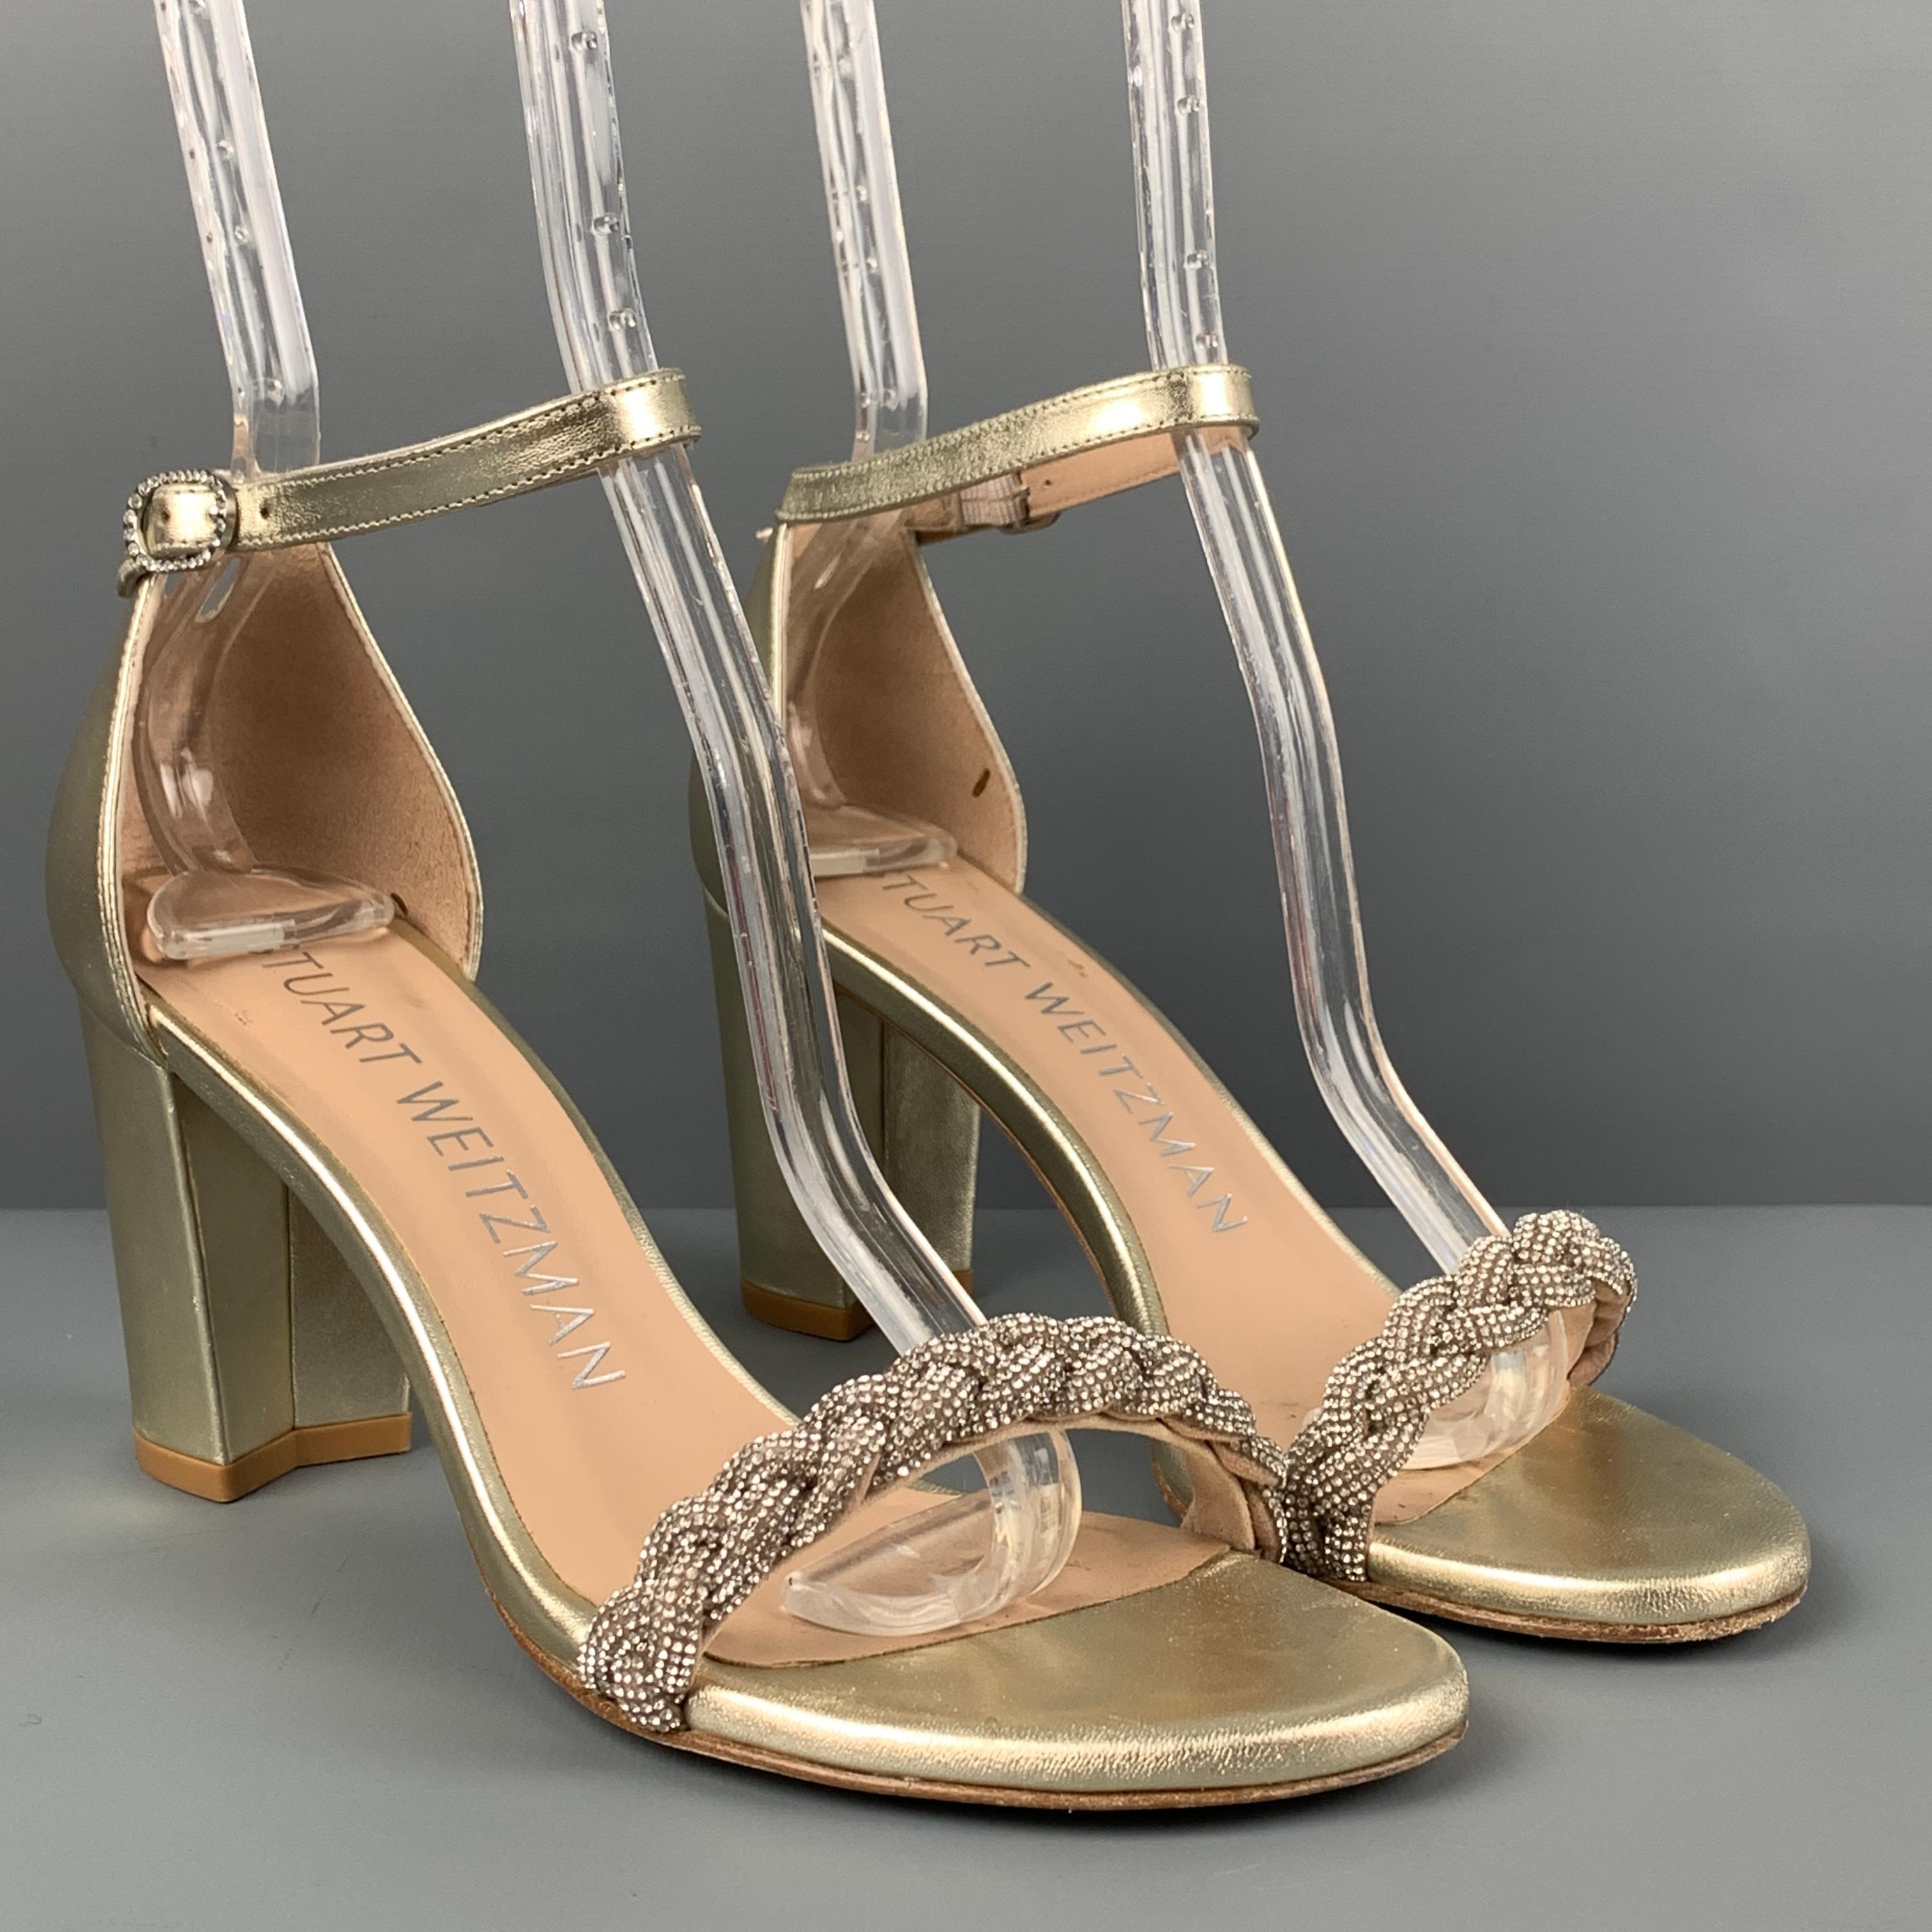 STUART WEITZMAN sandals comes in a platinum silver leather featuring a braided rhinestone detail, chunky heel, and a ankle strap closure. Comes with dust bag. Made in Spain. 

Very Good Pre-Owned Condition.
Marked: 6.5
Original Retail Price: